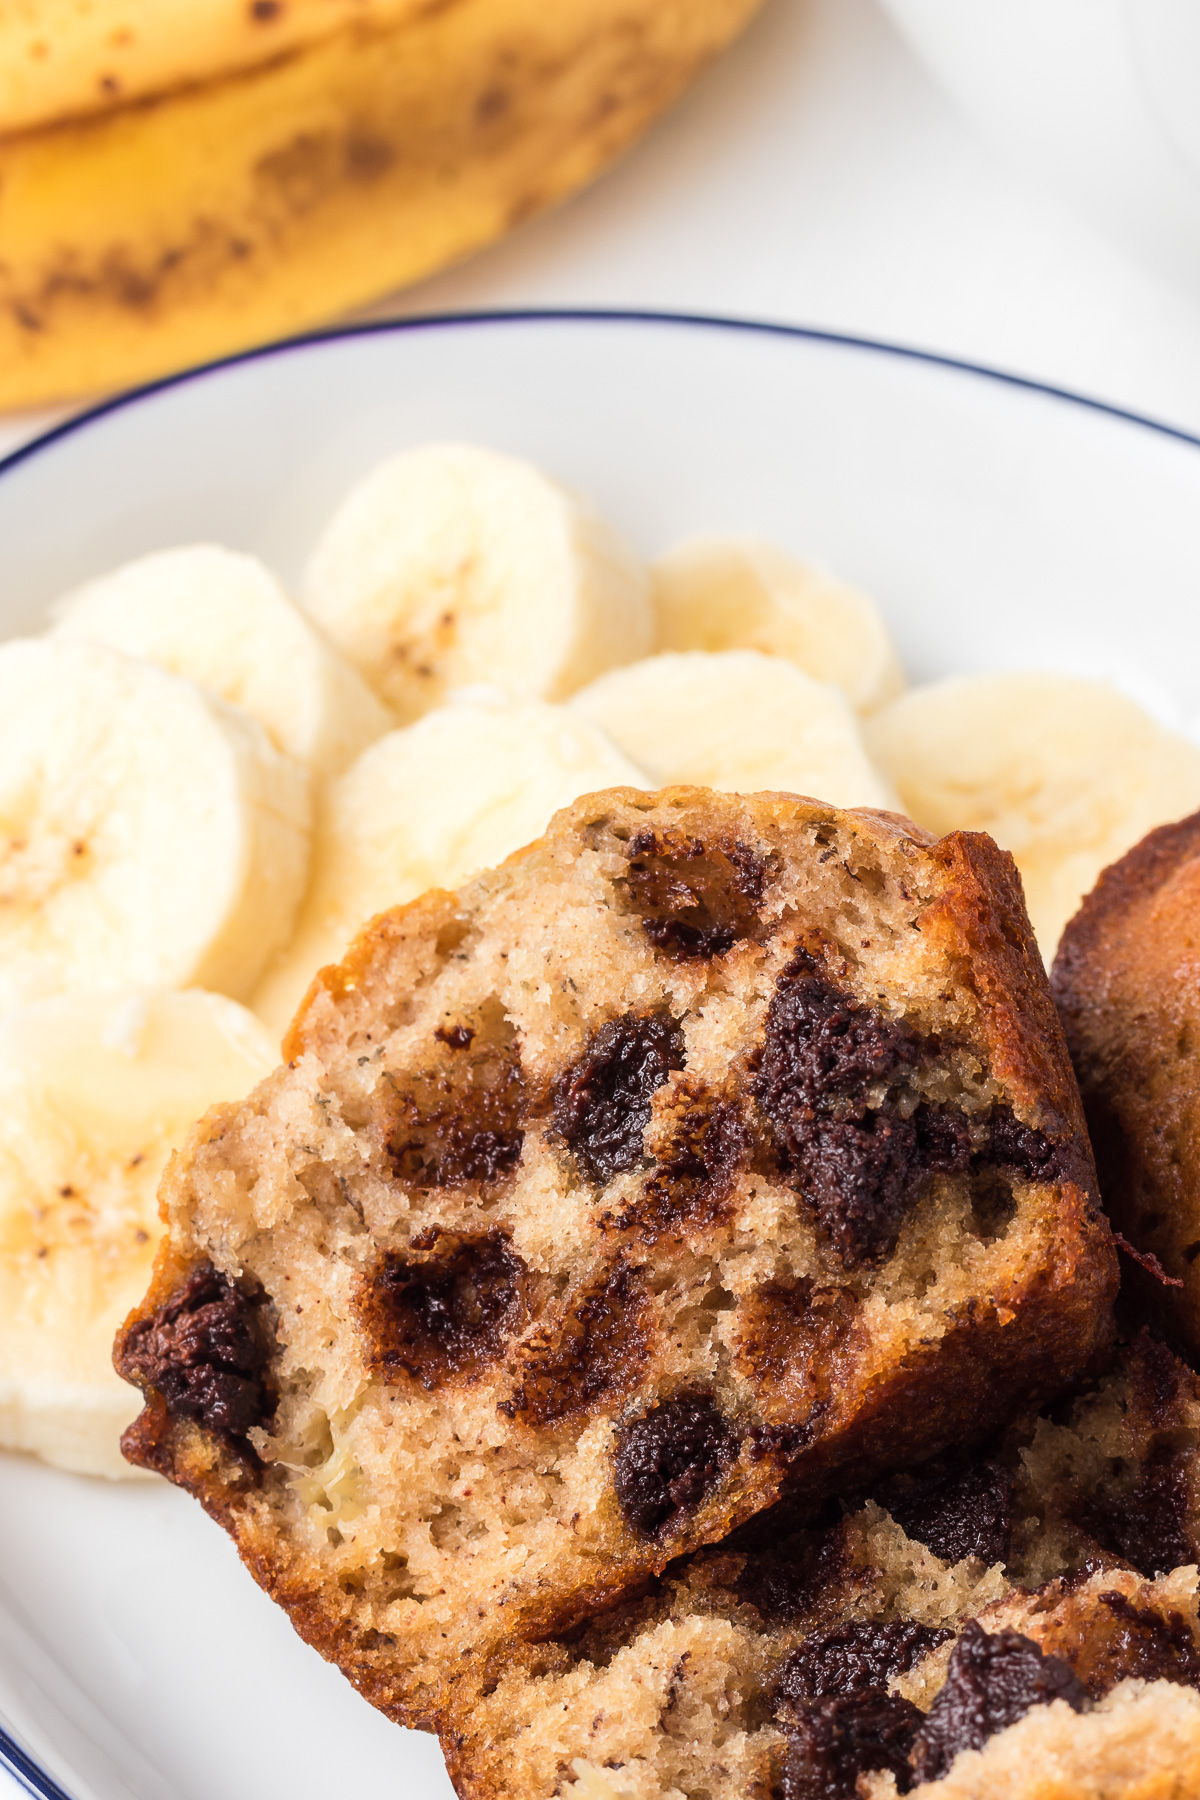 Banana Chocolate Chip Muffins are tender and sweet, with a moist crumb and milk chocolate chips that melt in your mouth with each bite! It tastes like your favorite banana bread, but bite-sized! These muffins make the perfect quick breakfast or afternoon snack! via @foodhussy